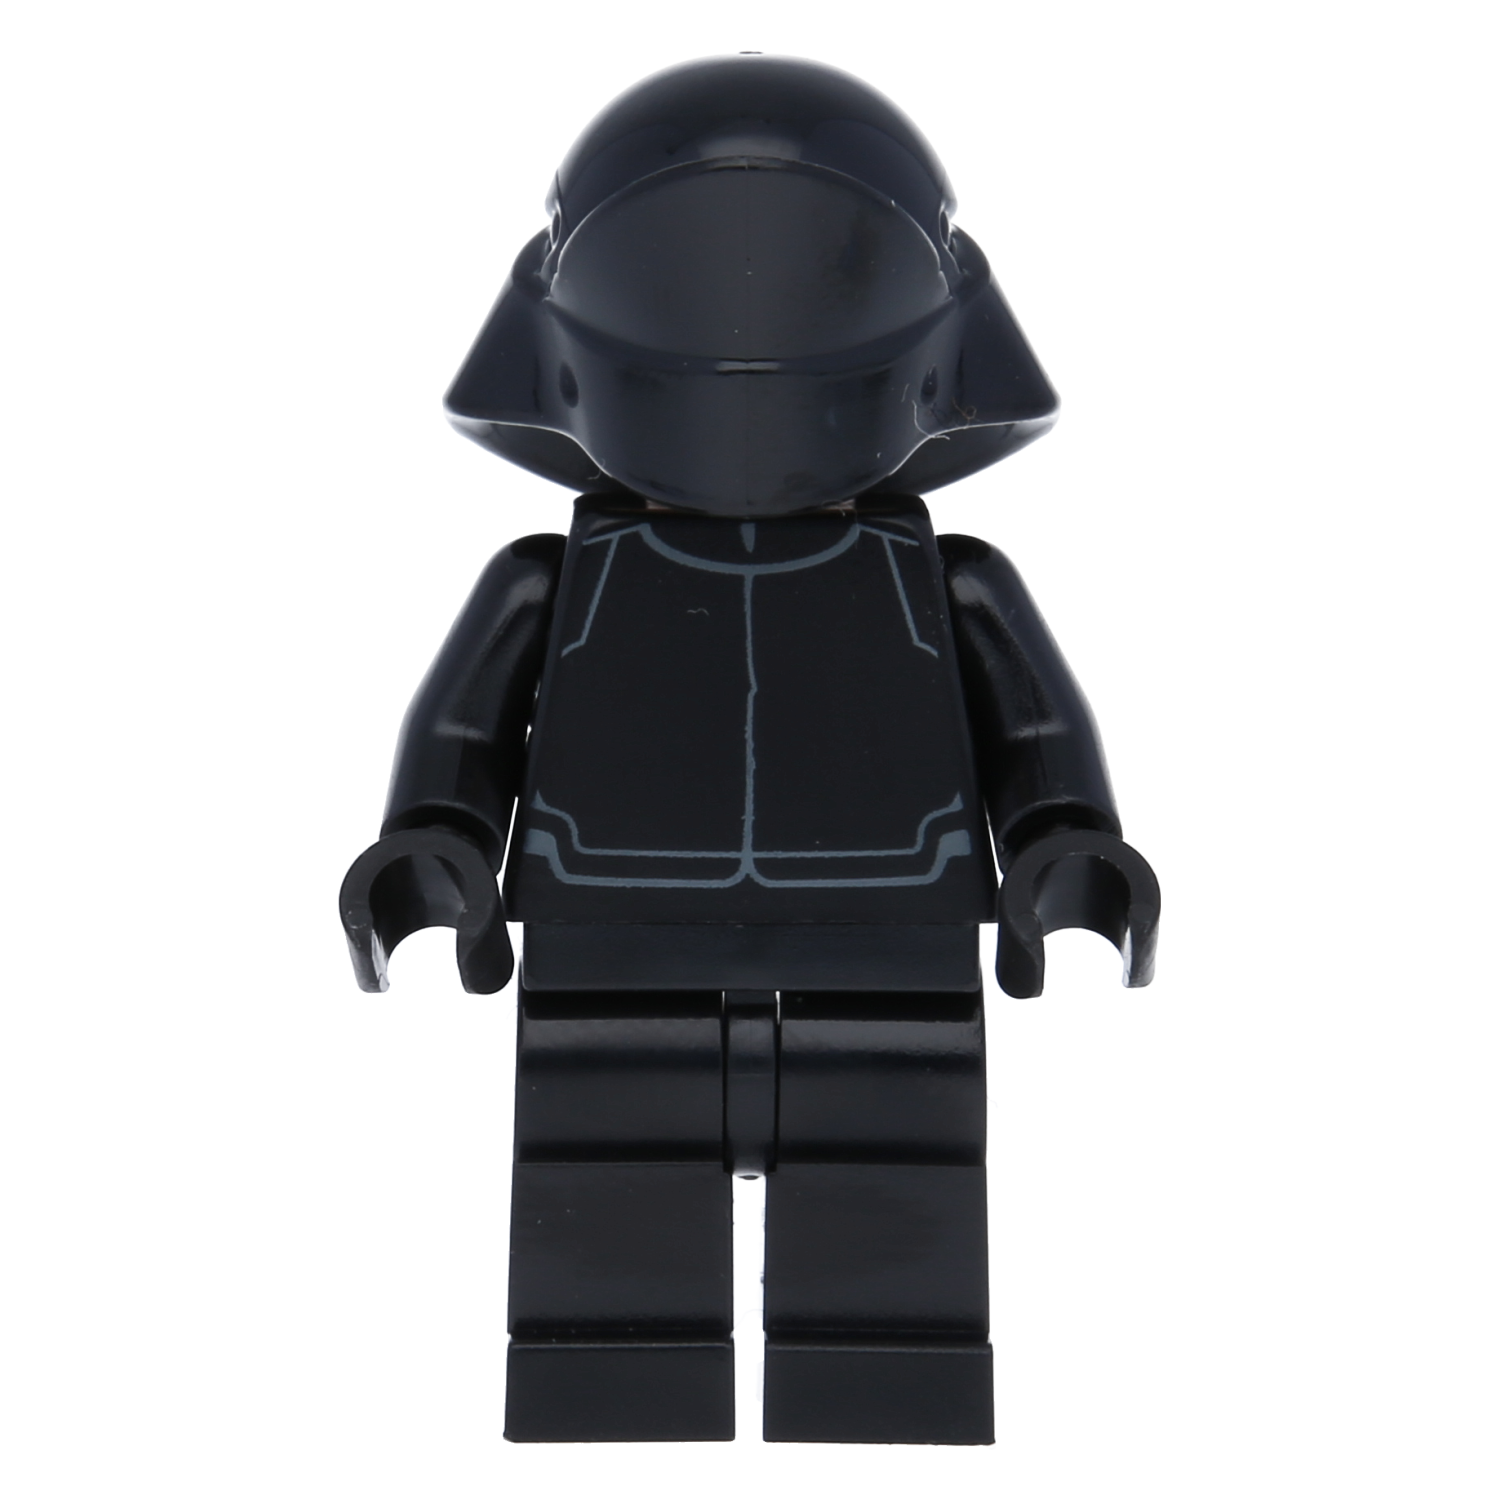 LEGO Star Wars Minifigue - Crew member of the first order (Hellnougat face)